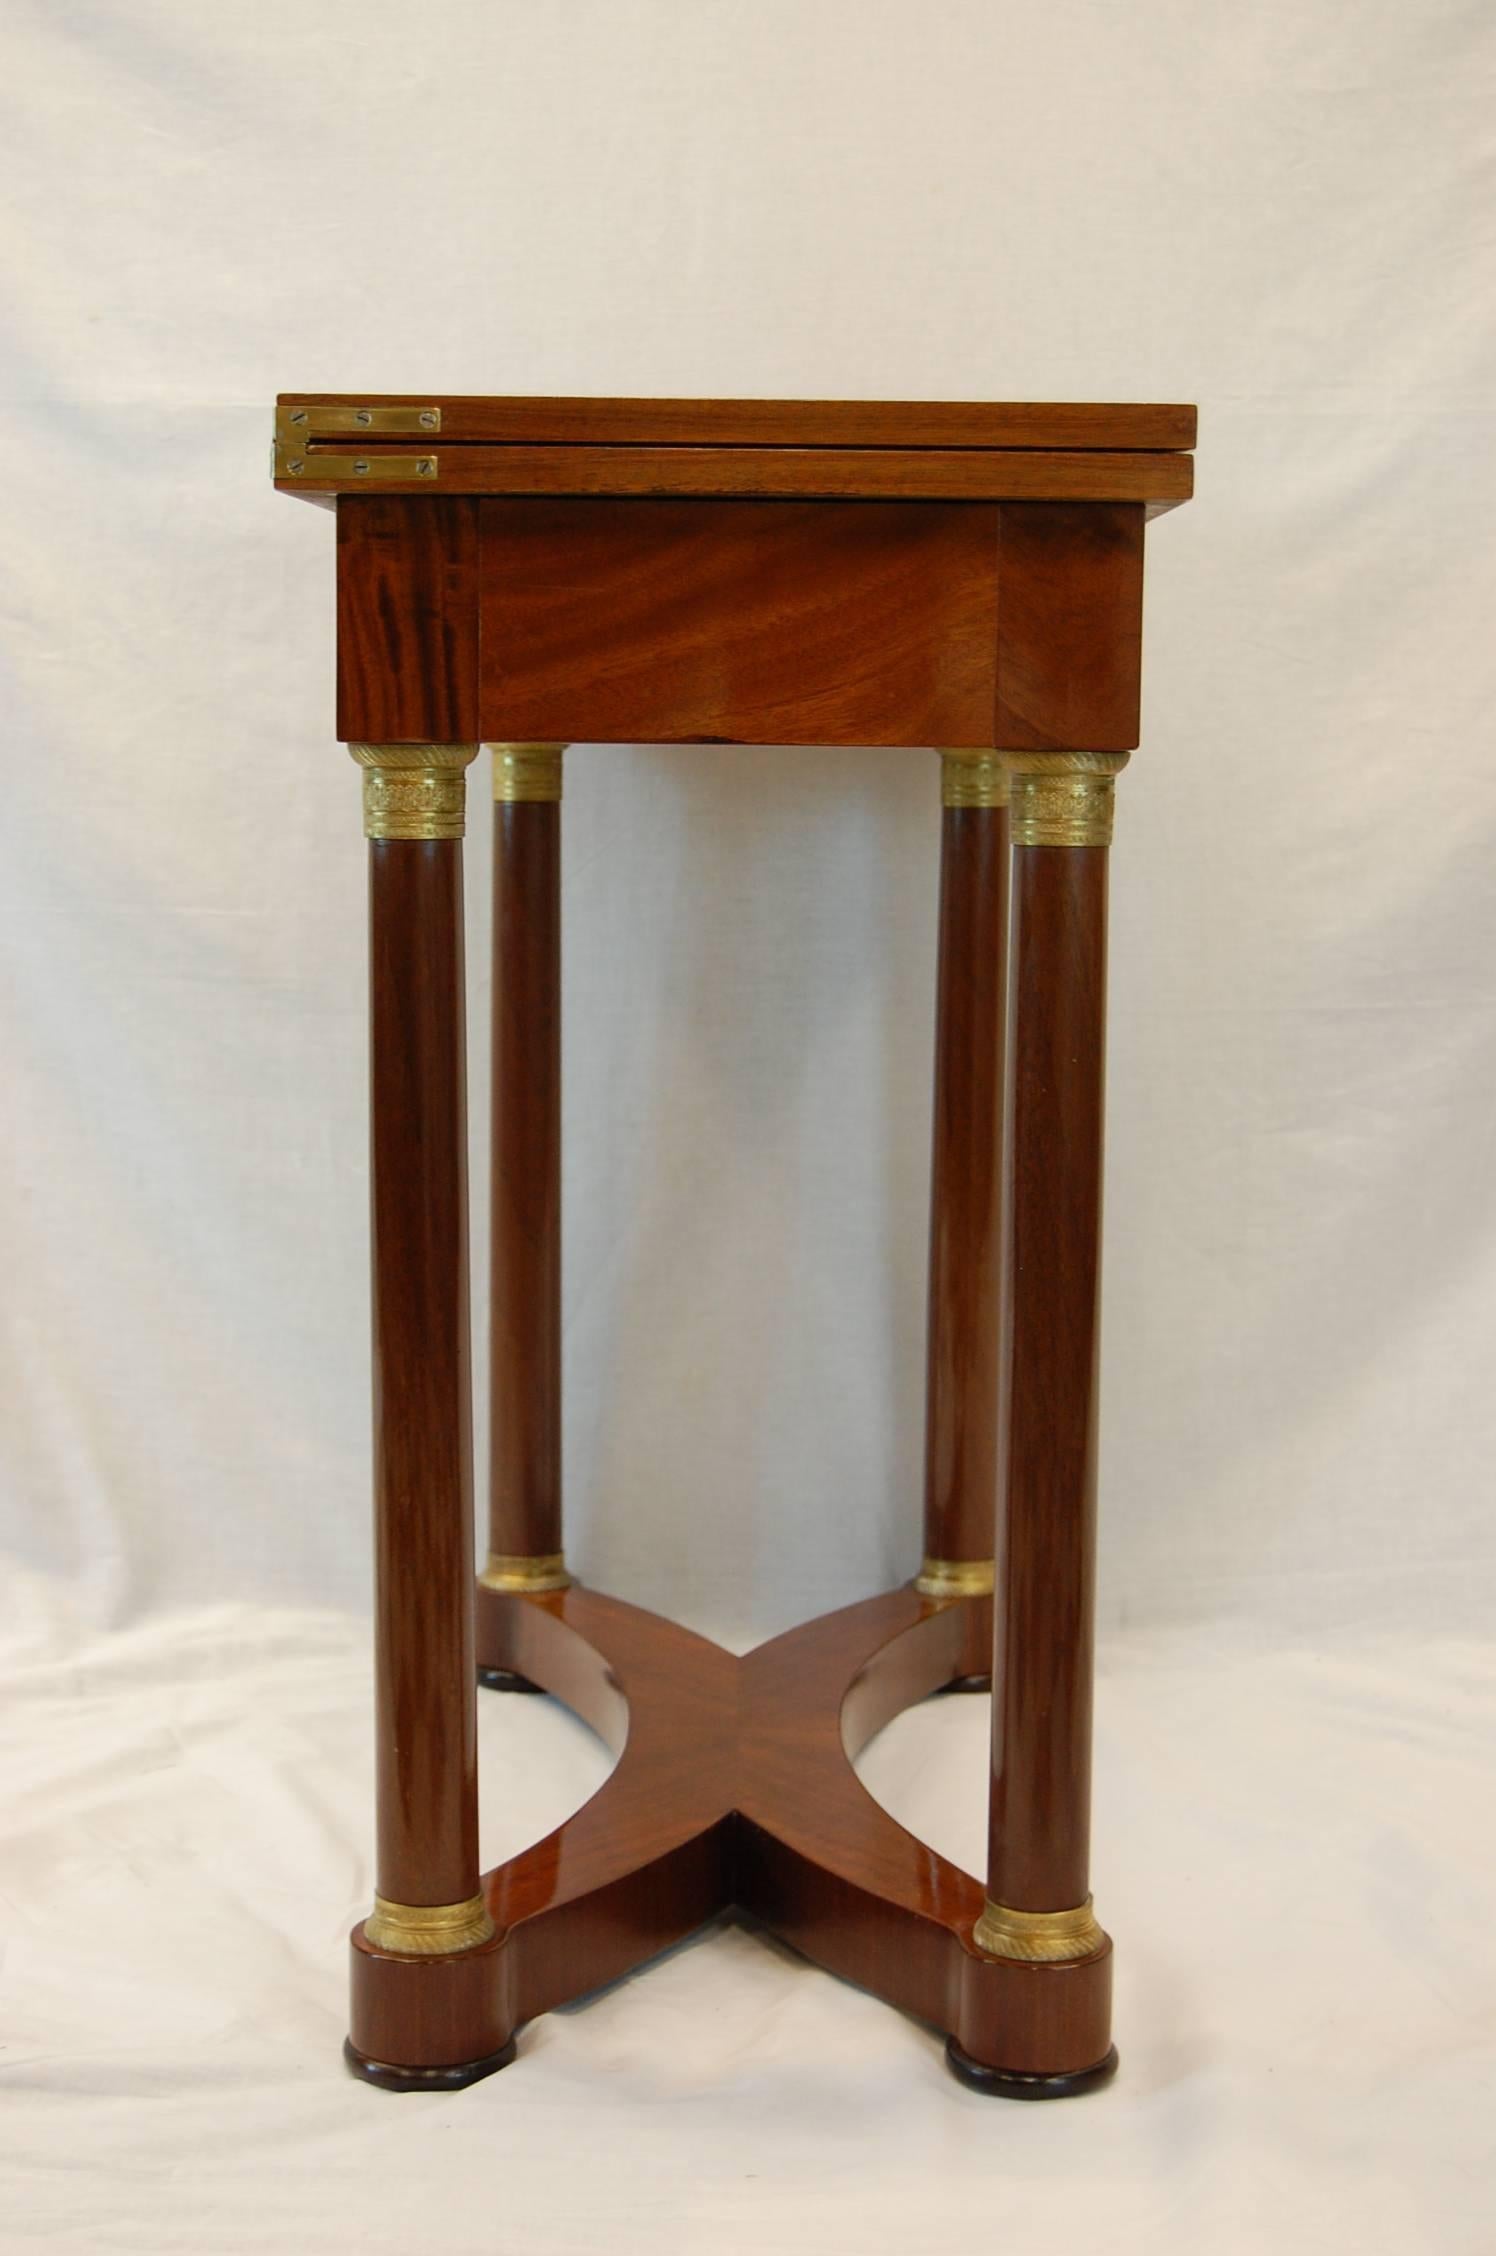 Late 19th Century Mahogany Flip-Top Card Table with Leather Insert, circa 1880